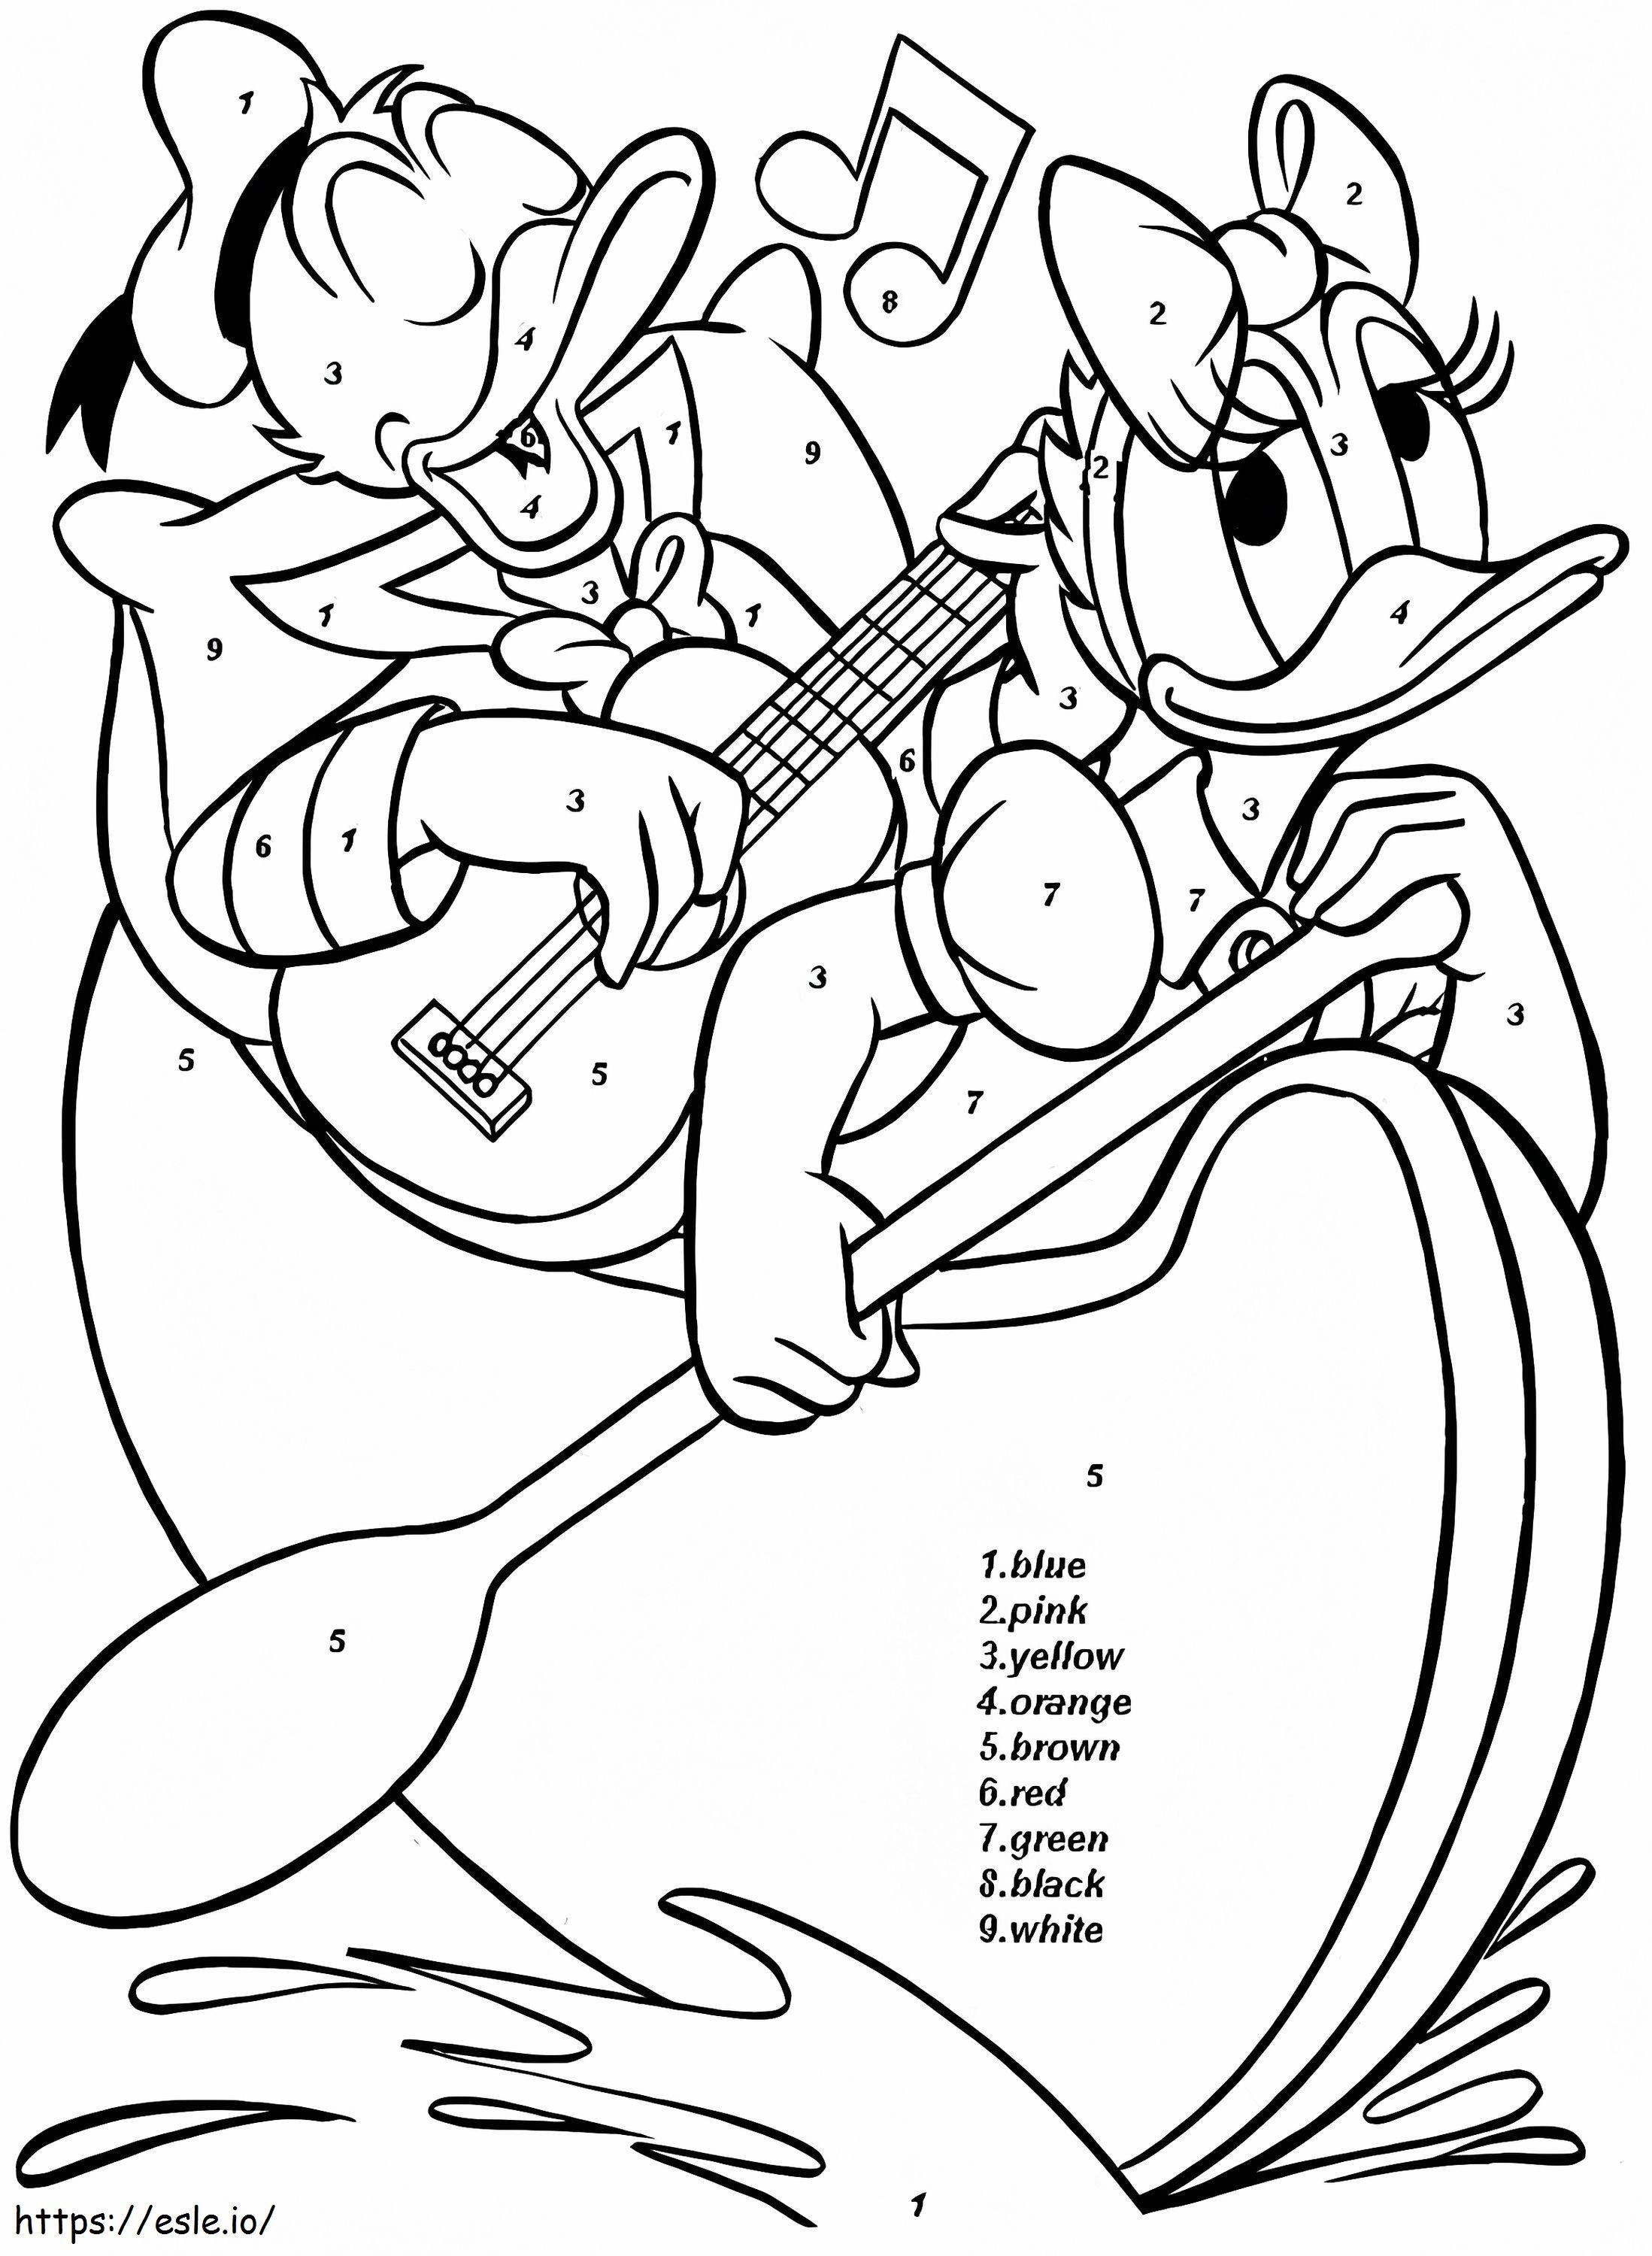 Donald And Daisy Duck Color By Number coloring page